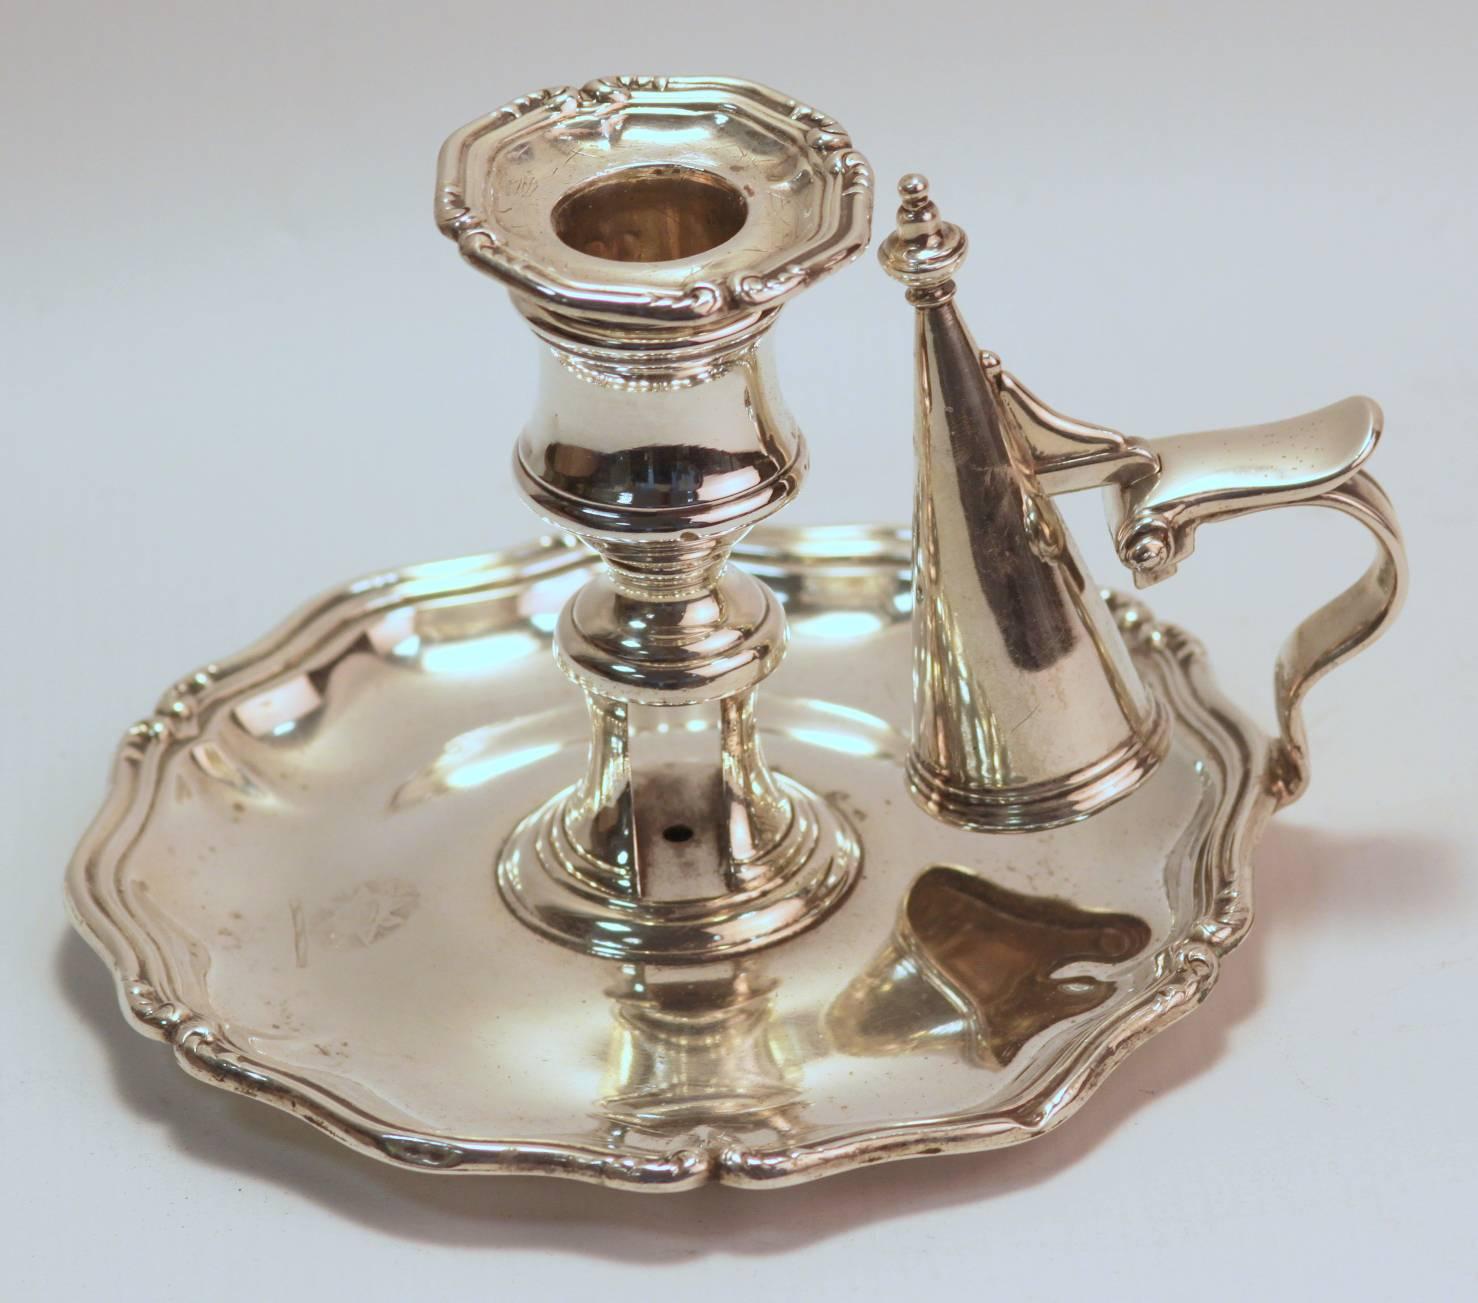 Antique Georgian solid sterling silver chamberstick
Made in Sheffield 1837
Maker: Creswick & Co (Thomas, James & Nathaniel Creswick)
Fully hallmarked.

Dimensions: 
Diameter x height: 14.6 x 10.2 cm
Weight: 294 grams total

Condition: